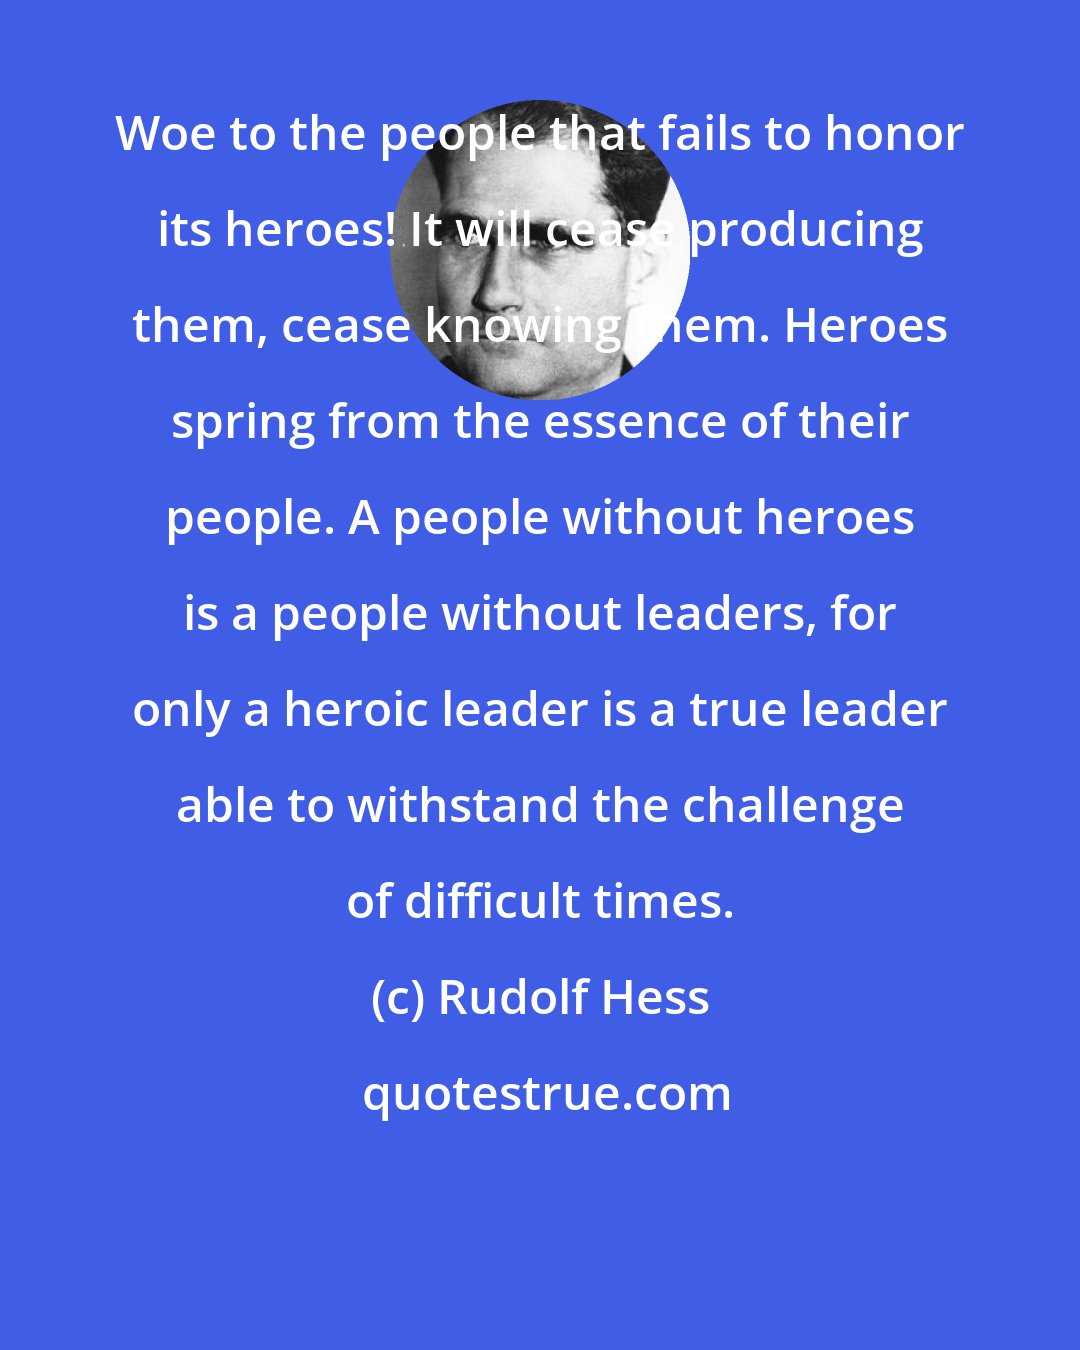 Rudolf Hess: Woe to the people that fails to honor its heroes! It will cease producing them, cease knowing them. Heroes spring from the essence of their people. A people without heroes is a people without leaders, for only a heroic leader is a true leader able to withstand the challenge of difficult times.